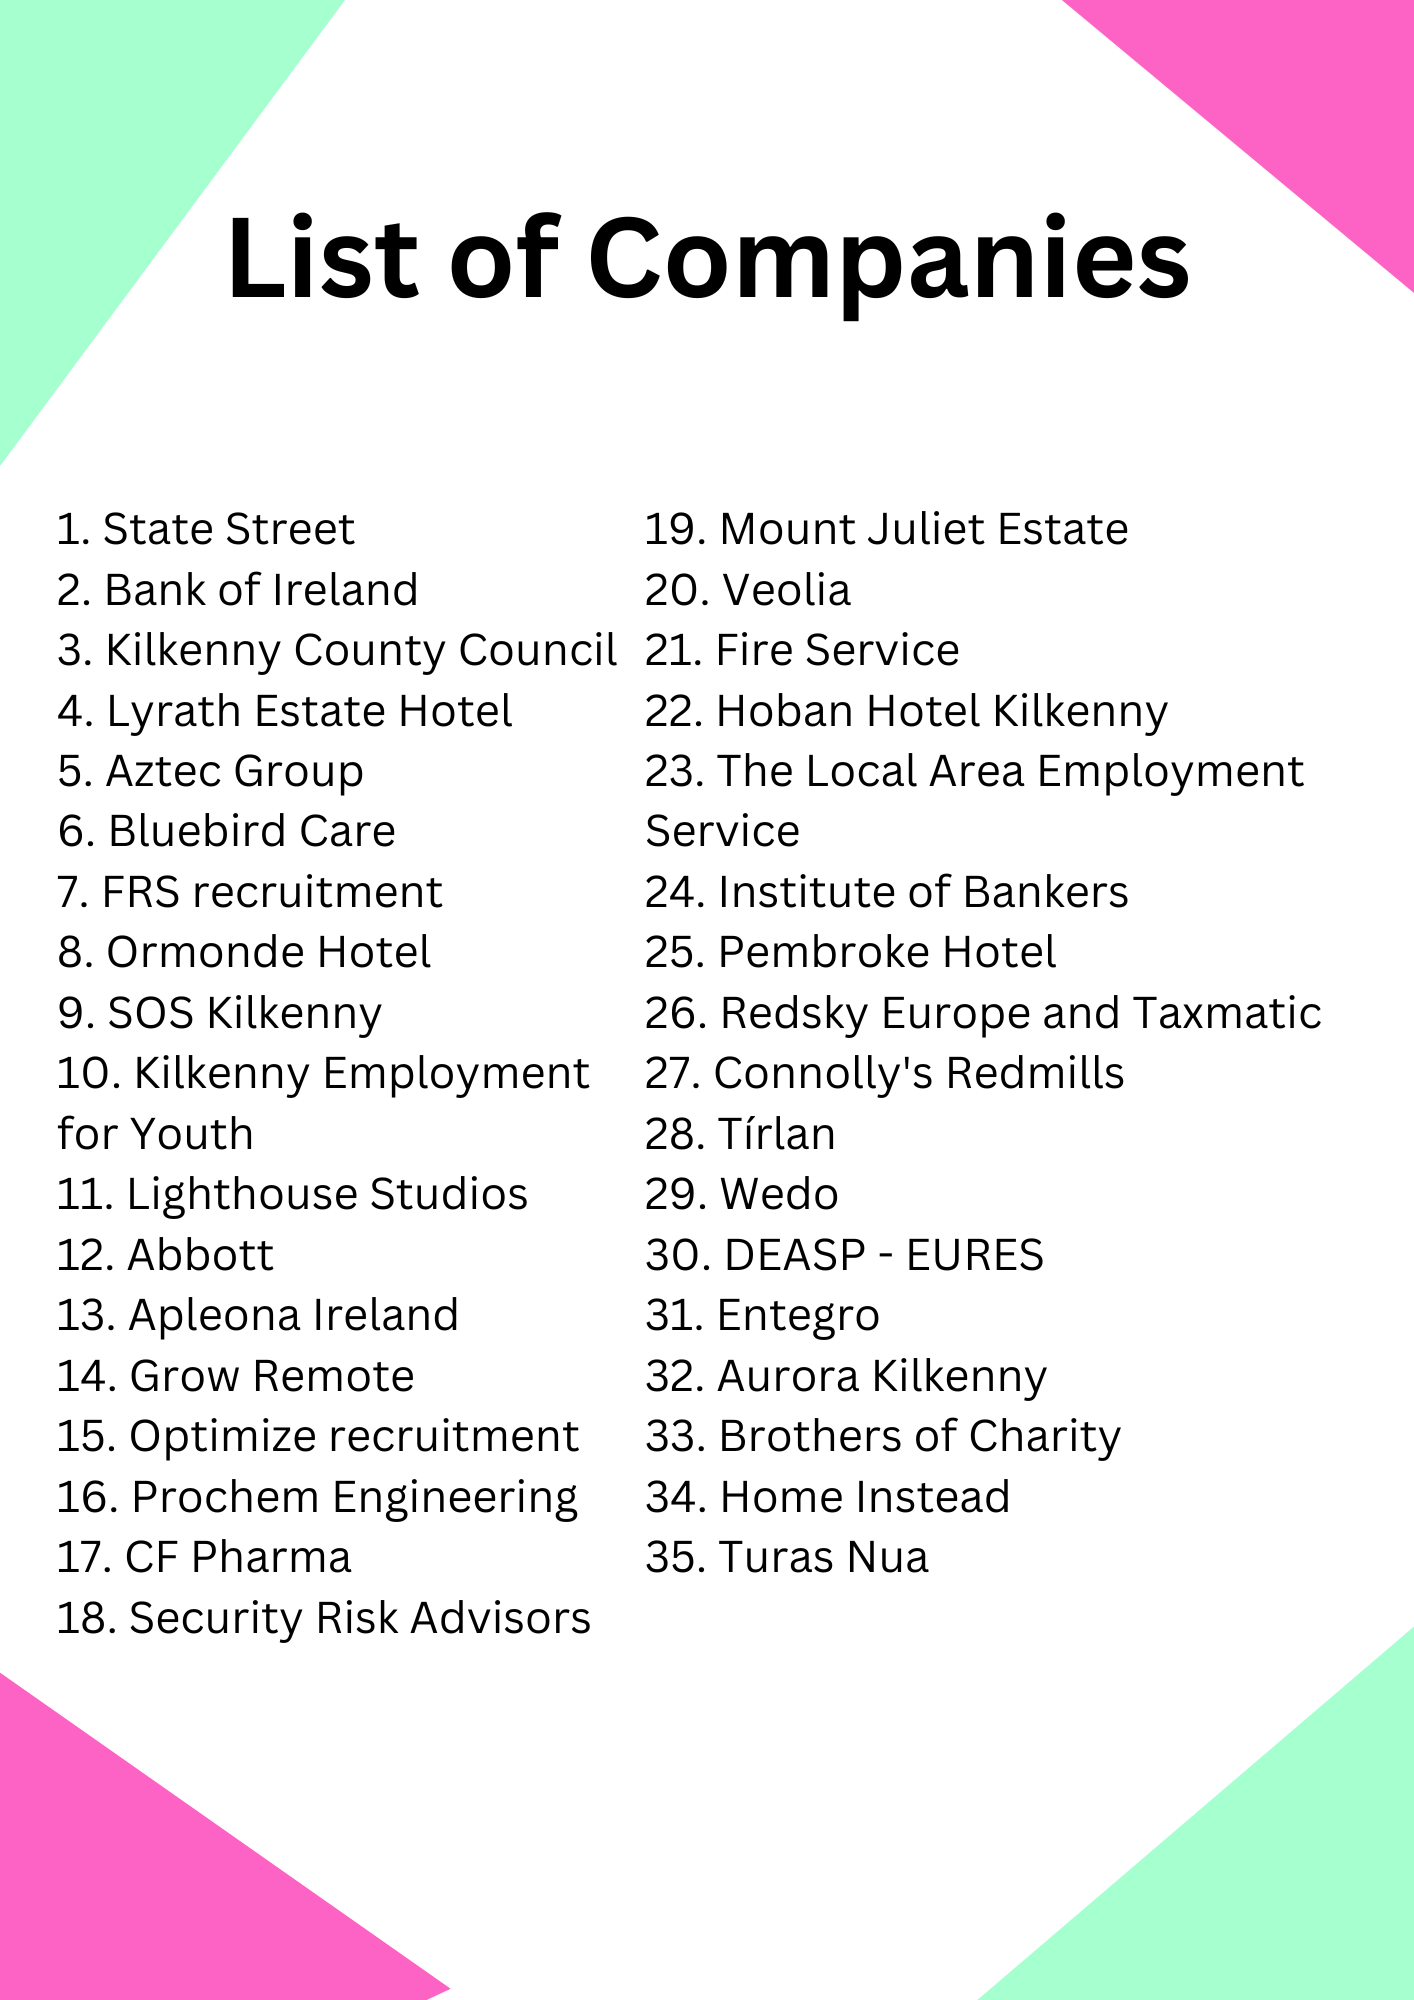 18. Security Risk Advisors 19. Mount Juliet 20. Veolia 21. Fire Service 22. Hoban 23. The Local Area Employment Service 24. Institute of Bankers 25. Pembroke Hotel 26. Redsky Europe and Taxmatic 2 3